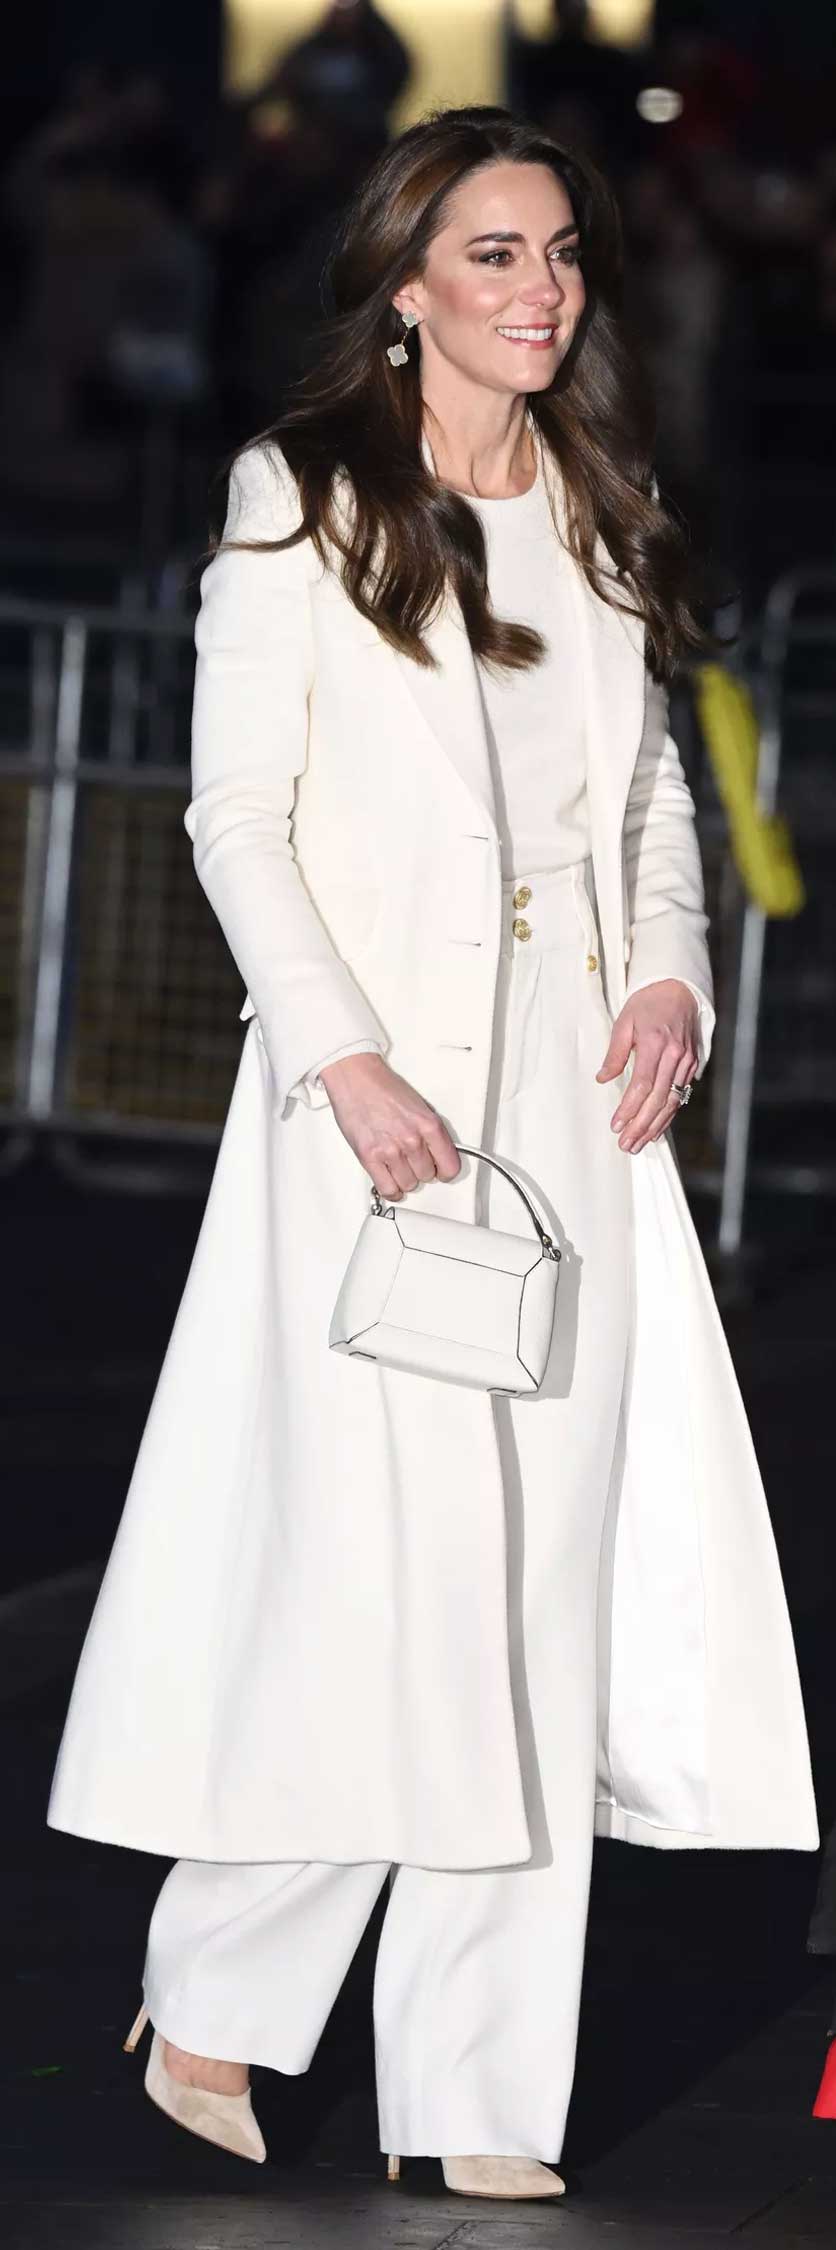 Kate Middleton drops jaws in winter white at her Christmas Carol Concert